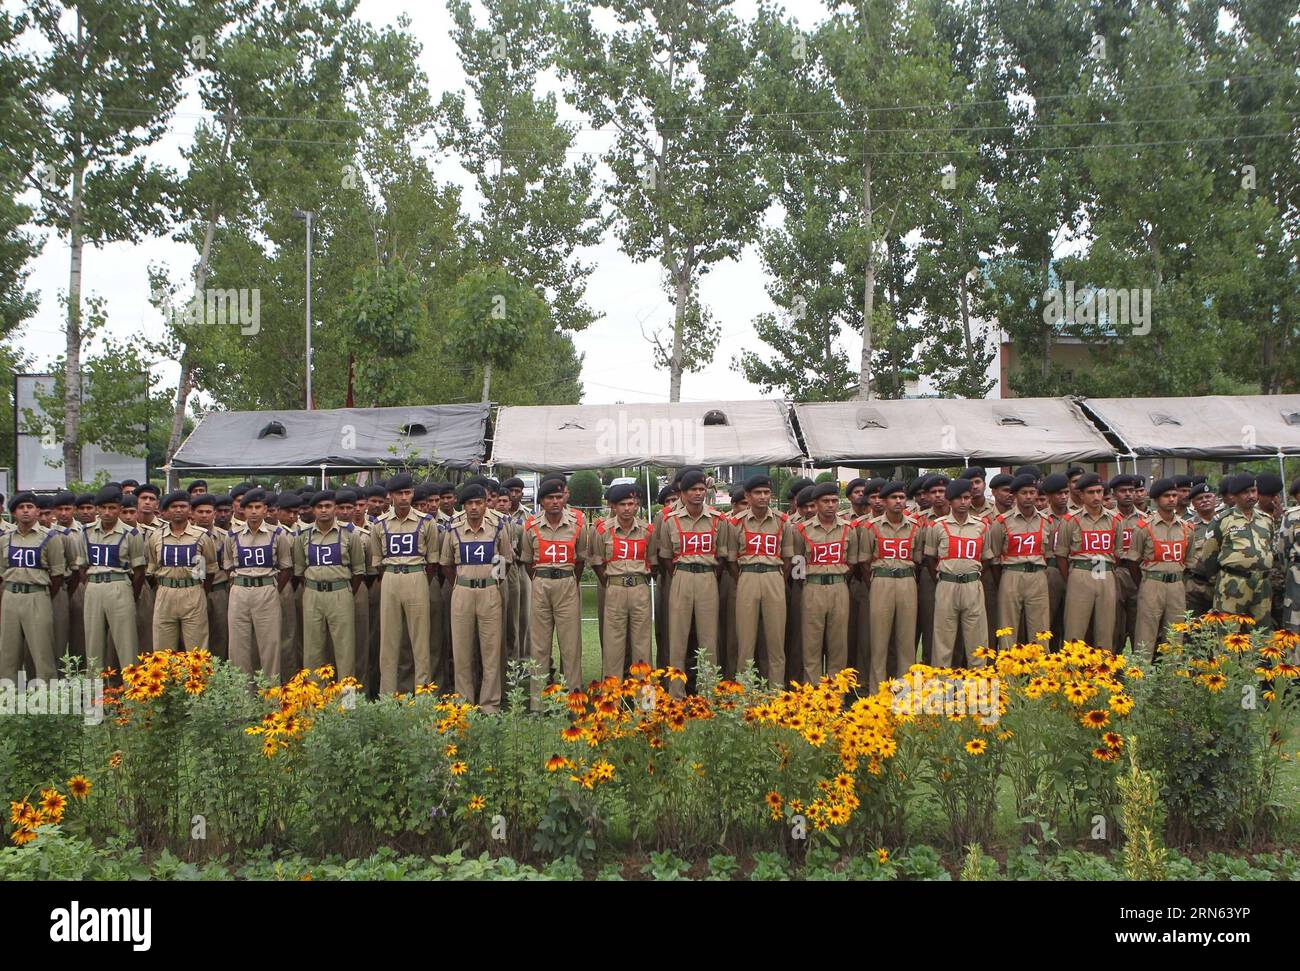 (150710) -- SRINAGAR, July 10, 2015 -- Border guards of India s Border Security Force (BSF) pay tributes to their killed colleague at their base camp in Humhama, on the outskirts of Srinagar, summer capital of Indian-controlled Kashmir, on July 10, 2015. A border guard of India s BSF has been killed in firing from Pakistan side on Line of Control (LoC) dividing Kashmir. ) KASHMIR-SRINAGAR-BORDER GUARD-WREATH LAYING JavedxDar PUBLICATIONxNOTxINxCHN   150710 Srinagar July 10 2015 Border Guards of India S Border Security Force BSF Pay Tributes to their KILLED colleague AT their Base Camp in Humha Stock Photo